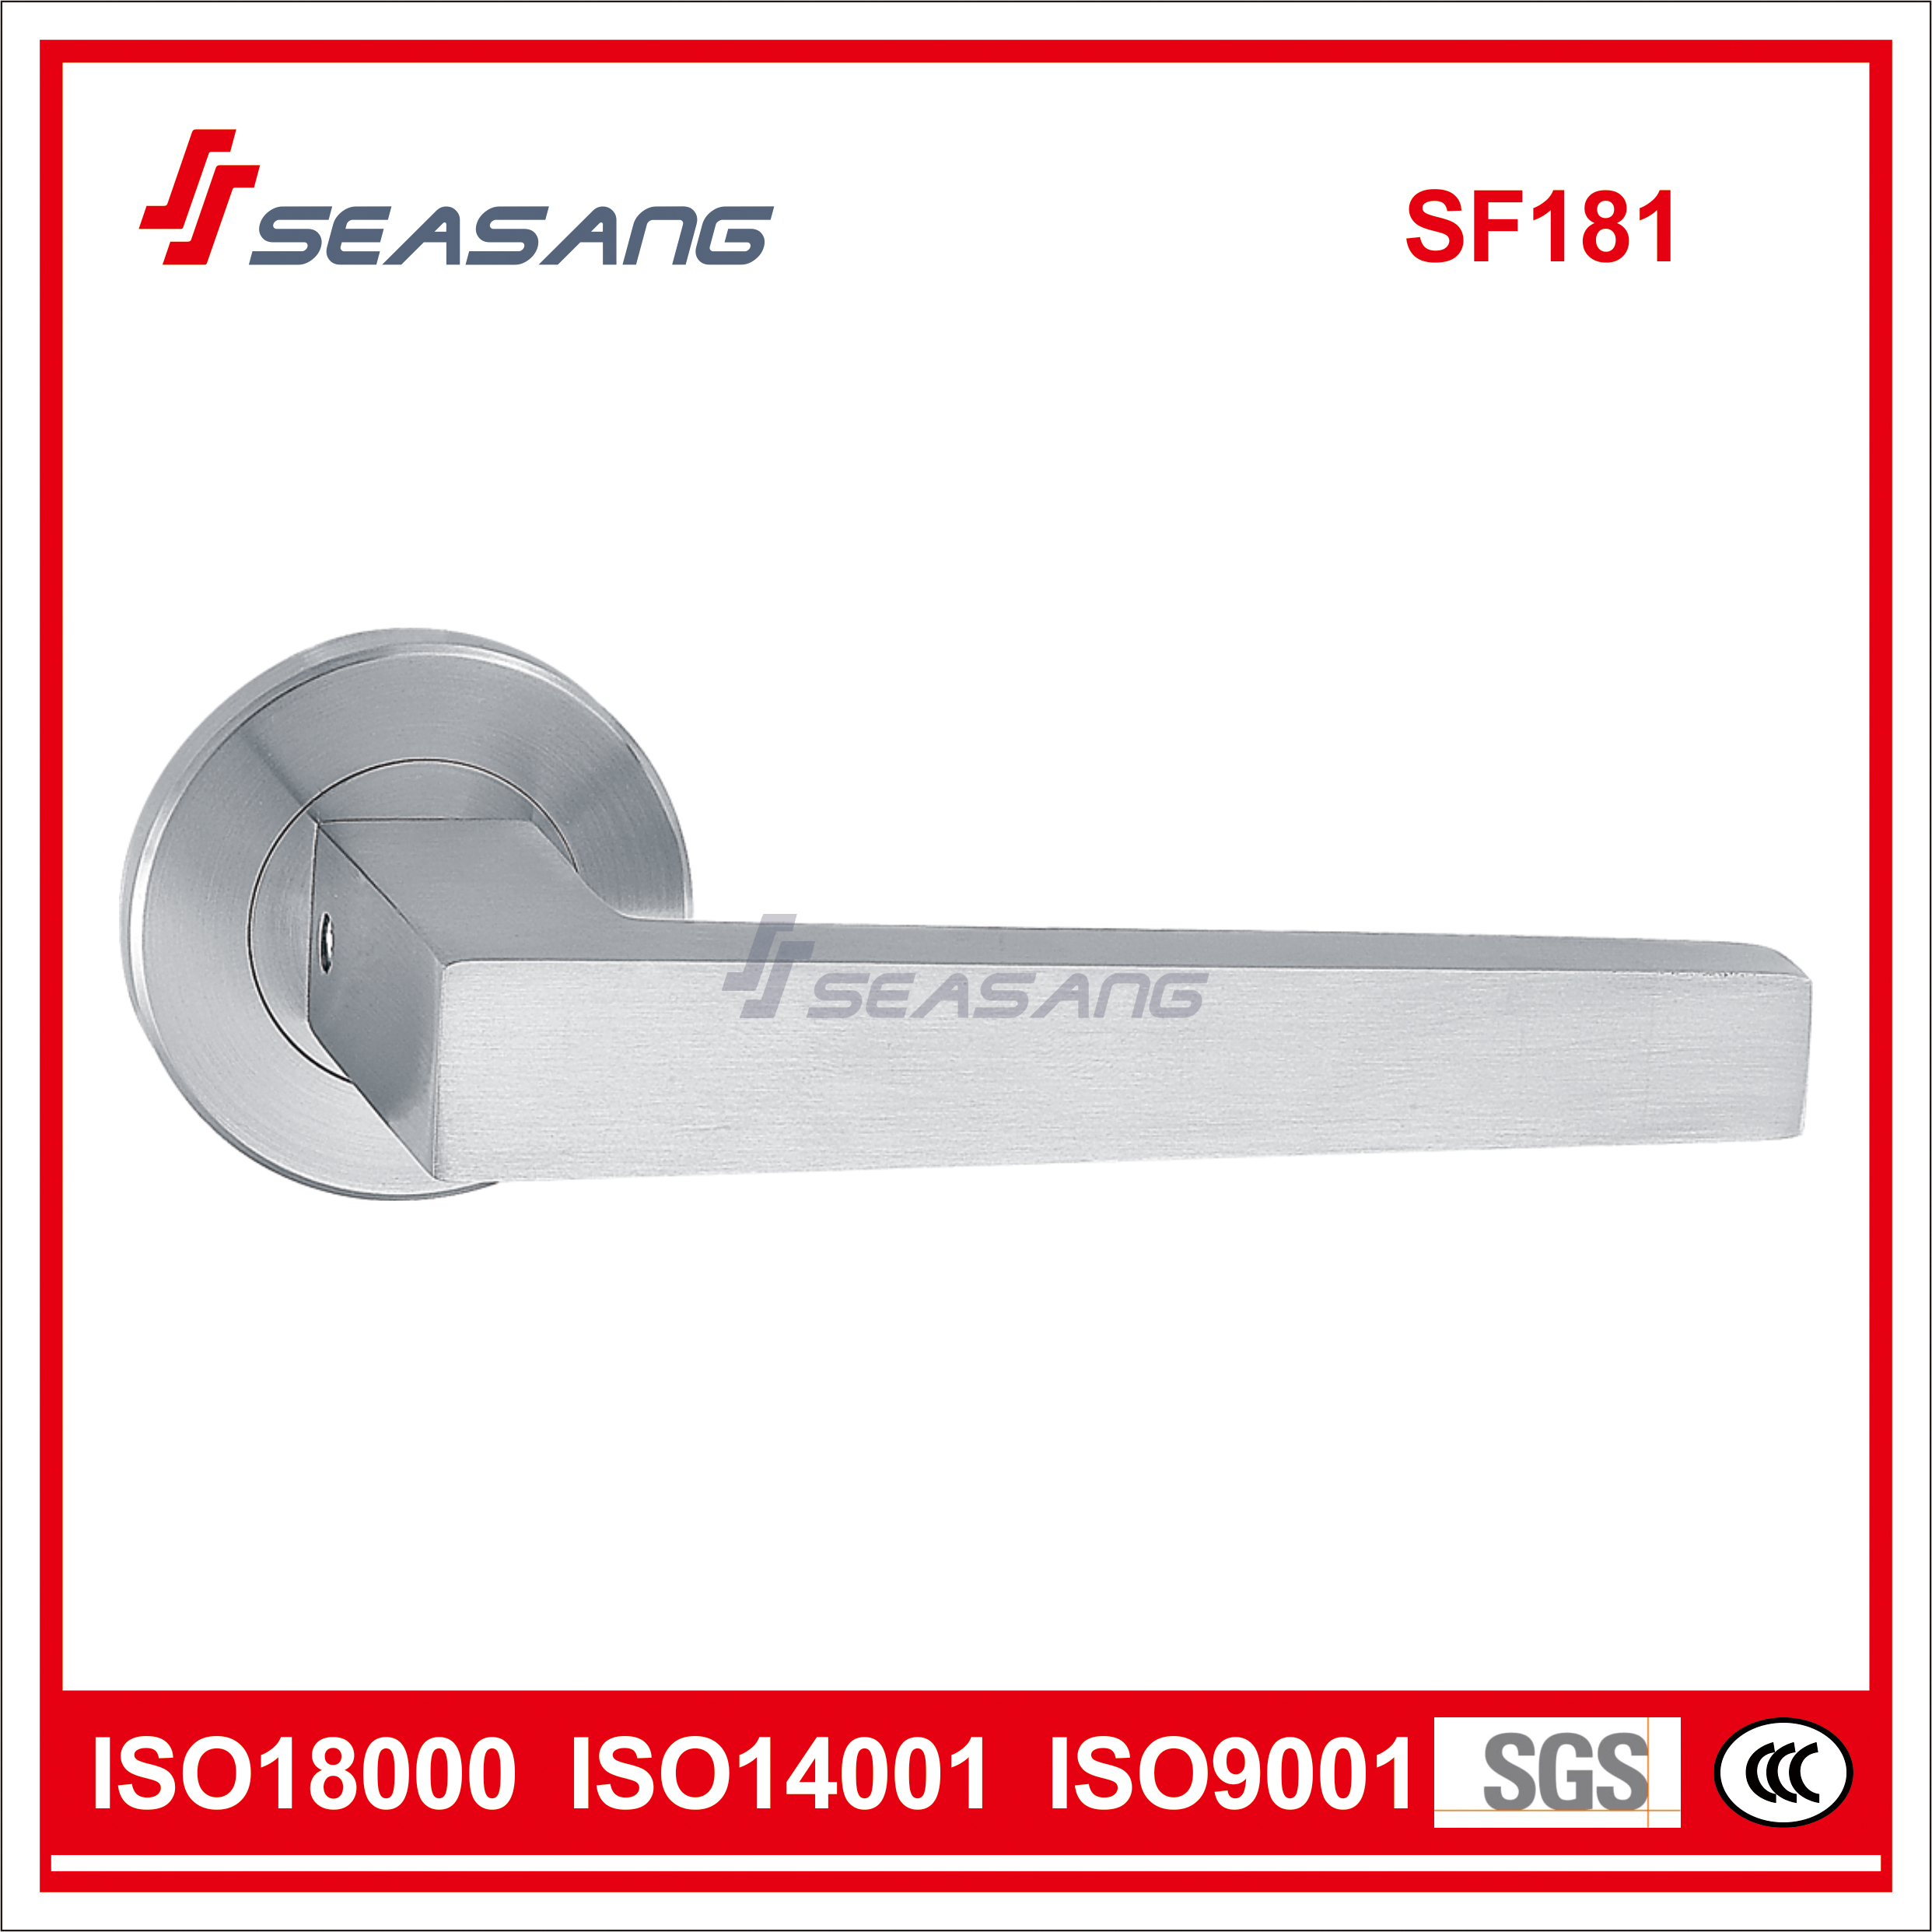 Types and Uses of Door Lever Handles